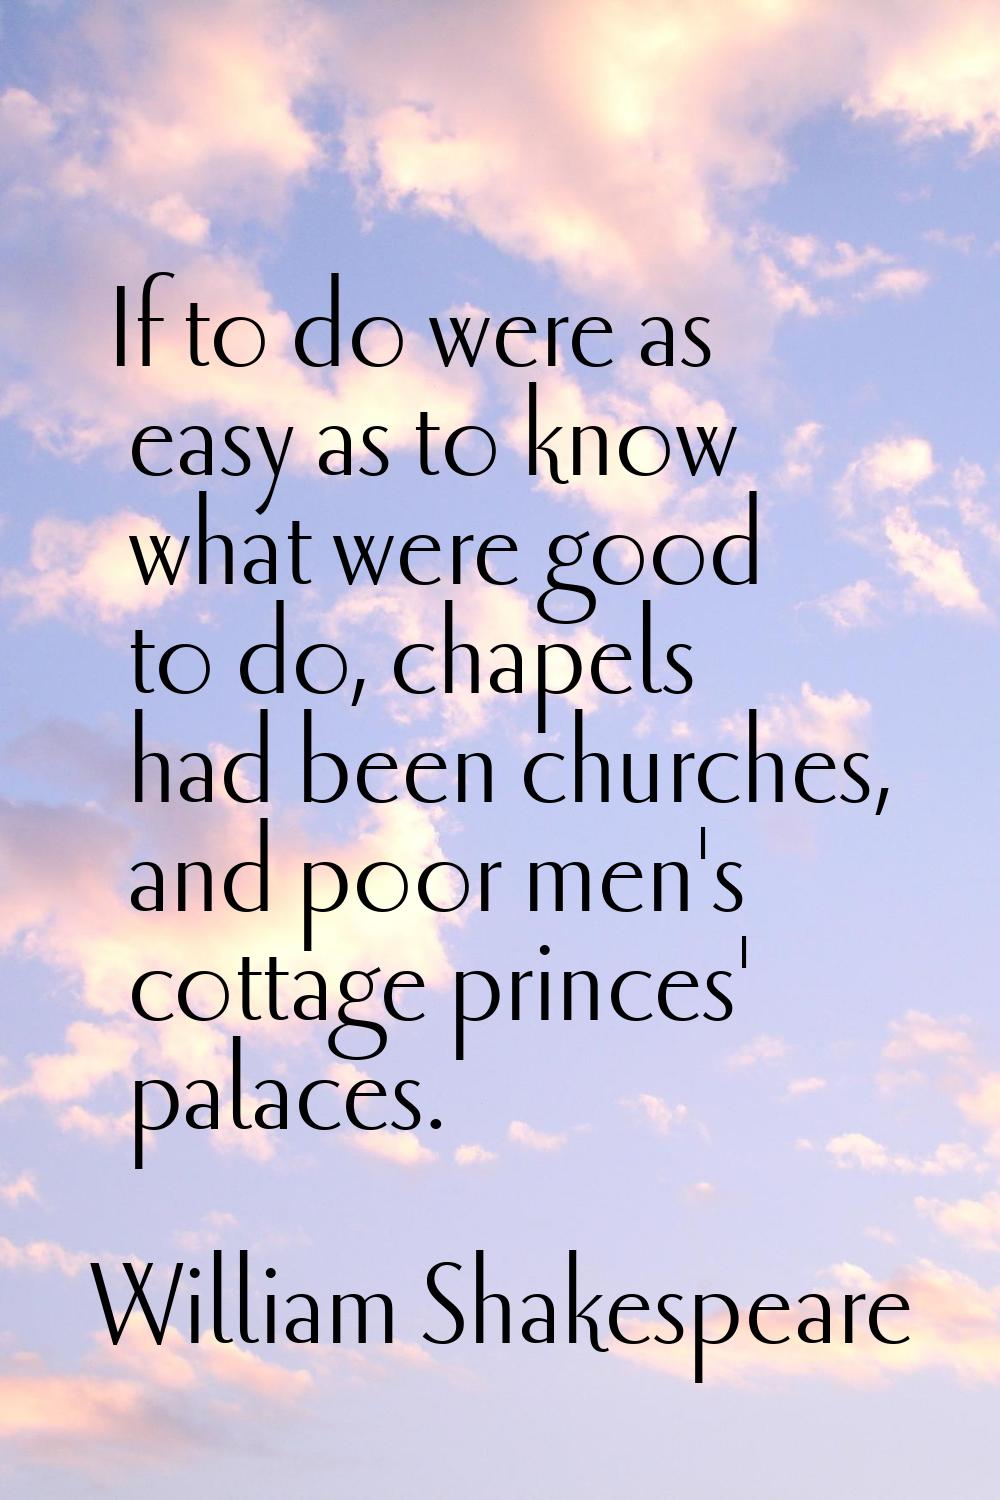 If to do were as easy as to know what were good to do, chapels had been churches, and poor men's co